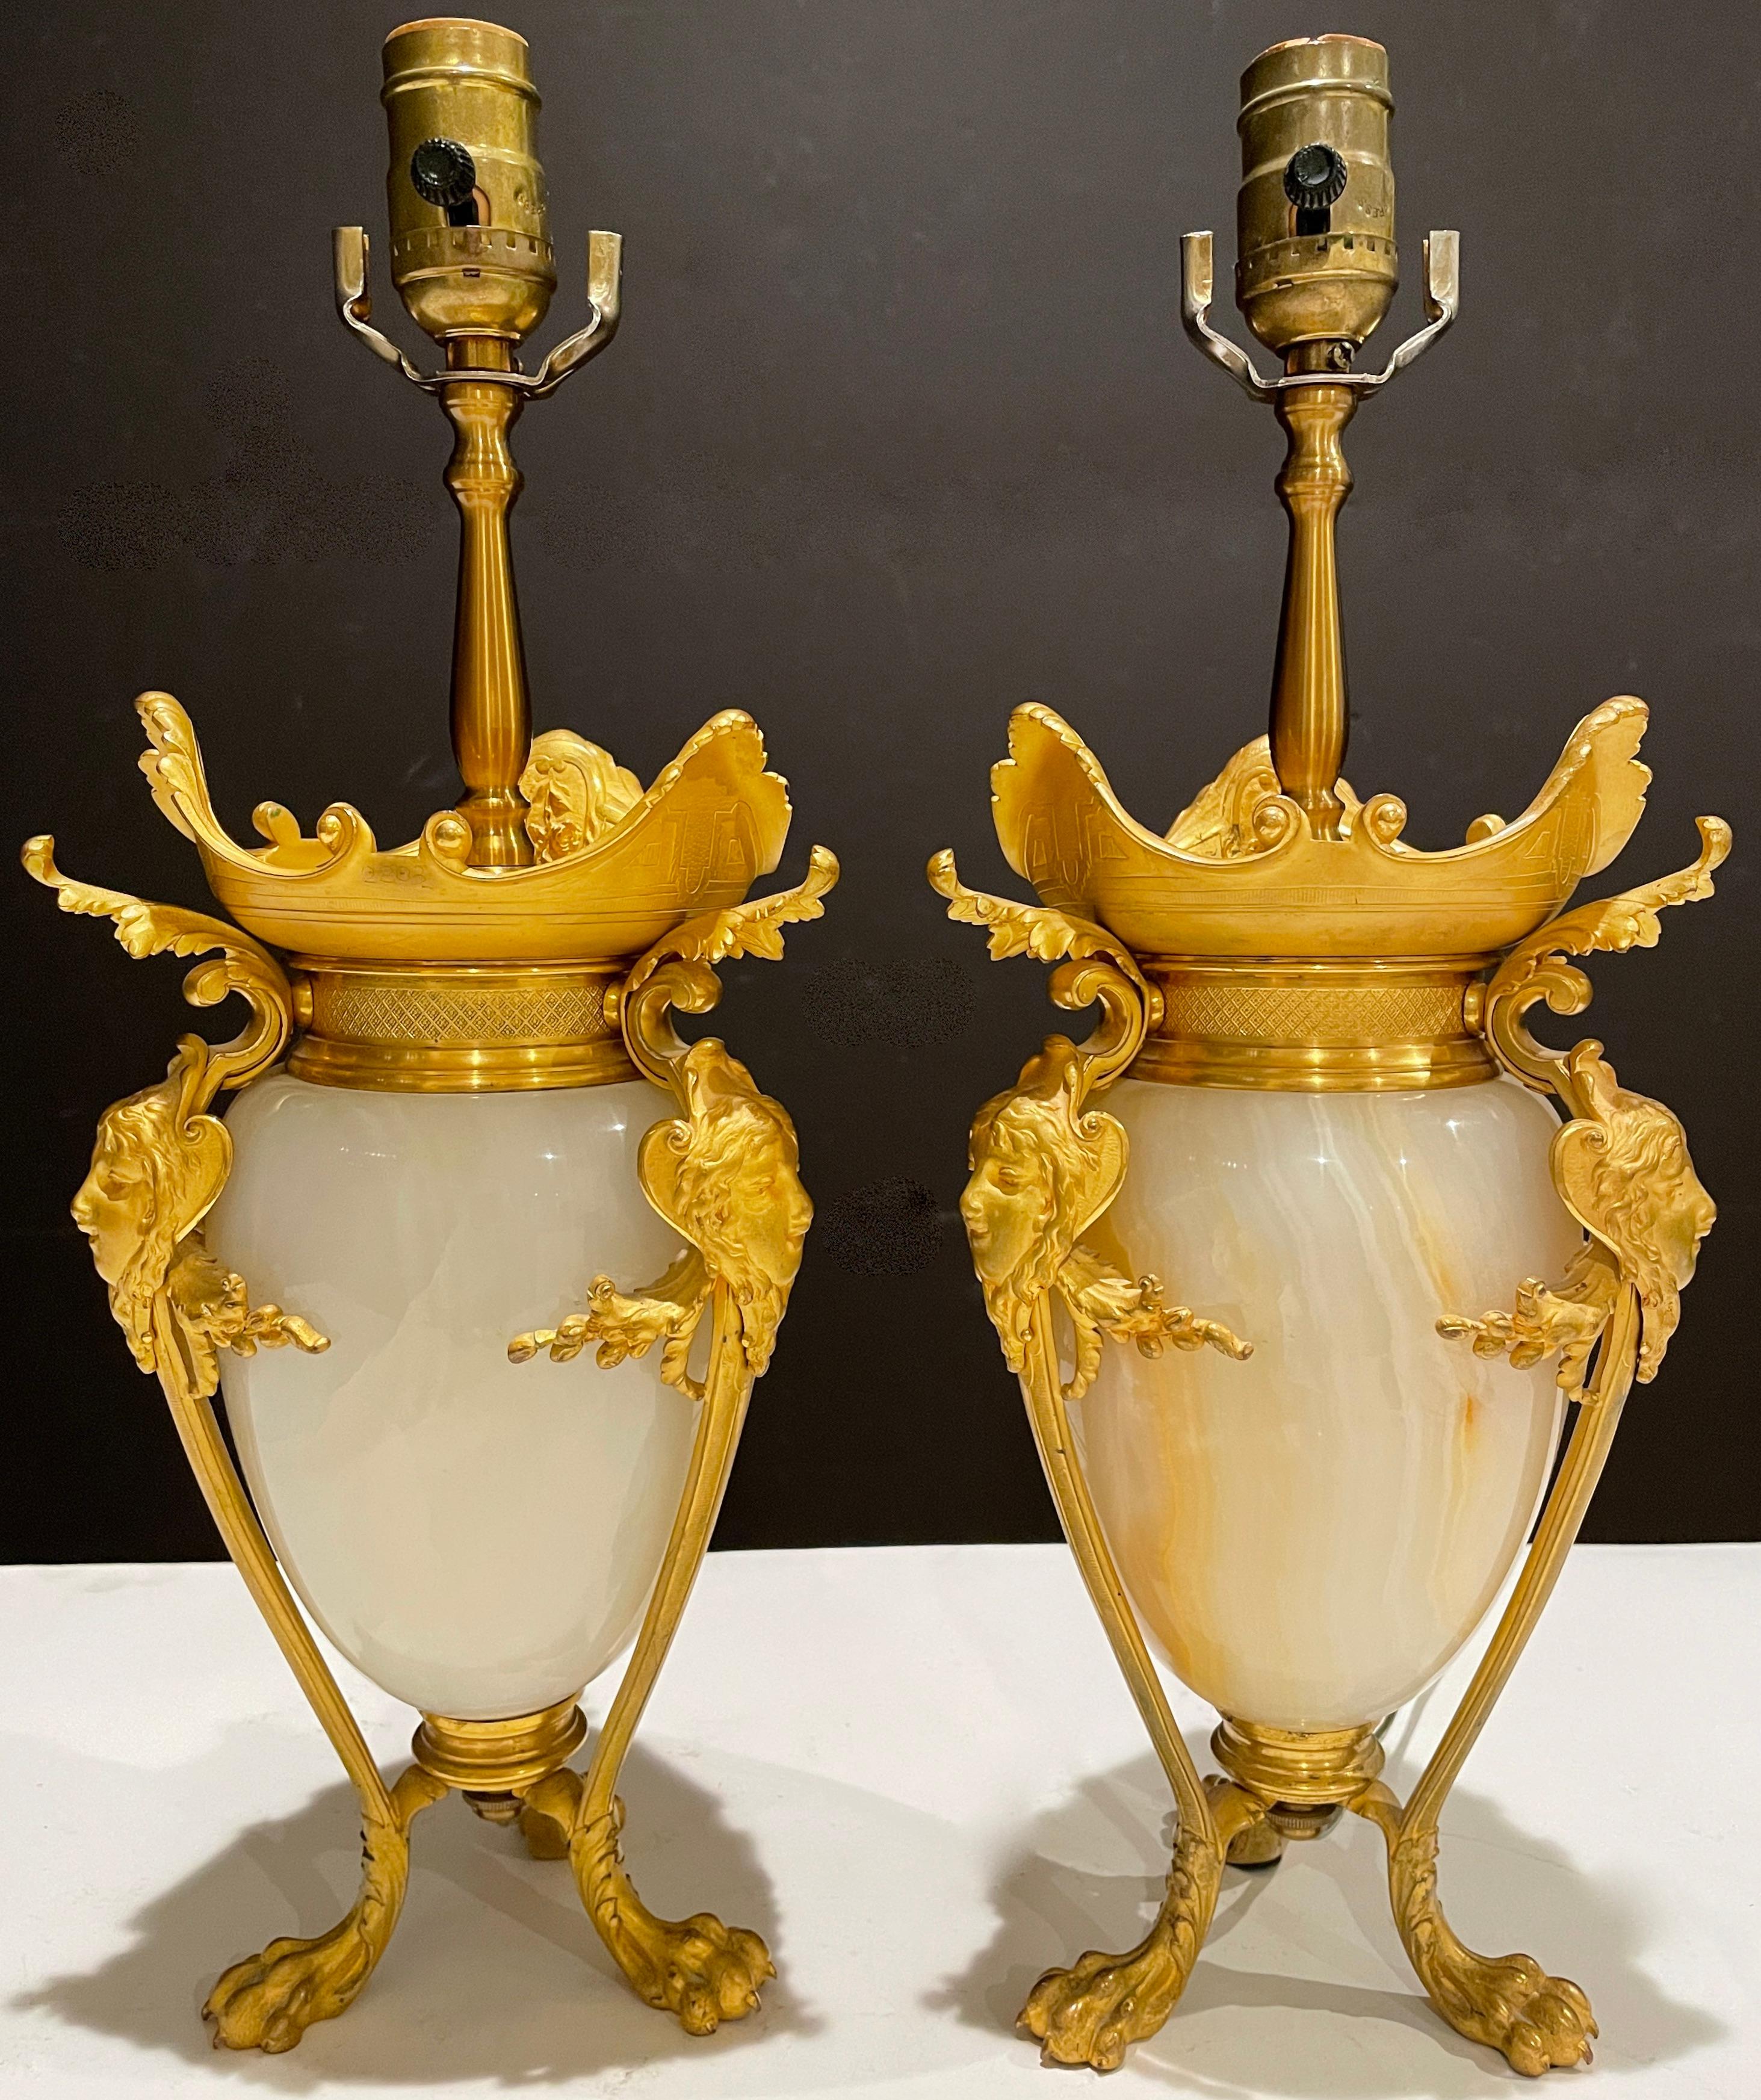 Pair of French 19th century gilt bronze and onyx urns mounted as lamps. Onyx partial egg form urns mounted with beautiful women's faces on handle supports ending in lion paw feet.
17